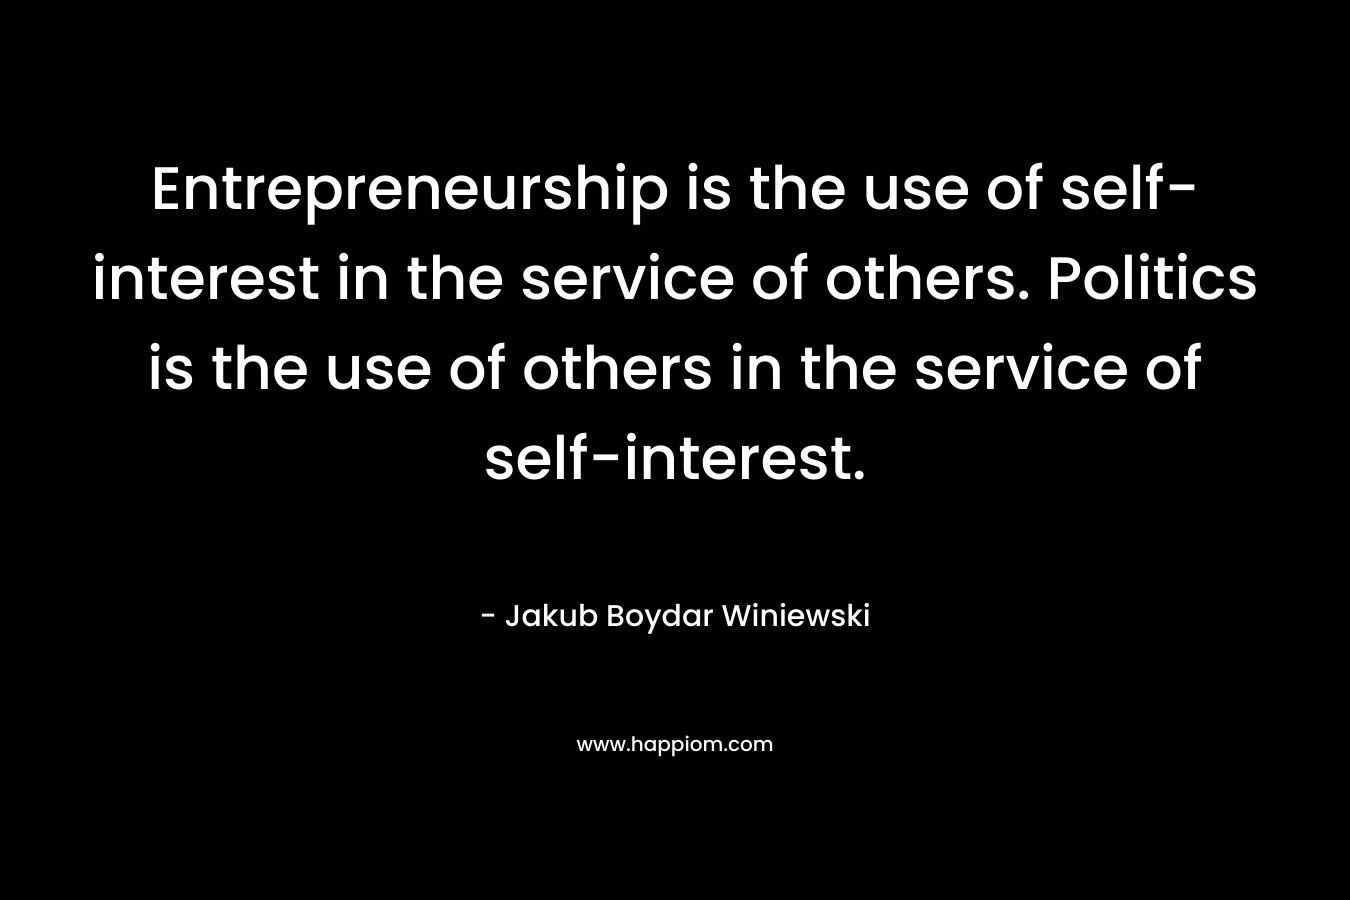 Entrepreneurship is the use of self-interest in the service of others. Politics is the use of others in the service of self-interest.